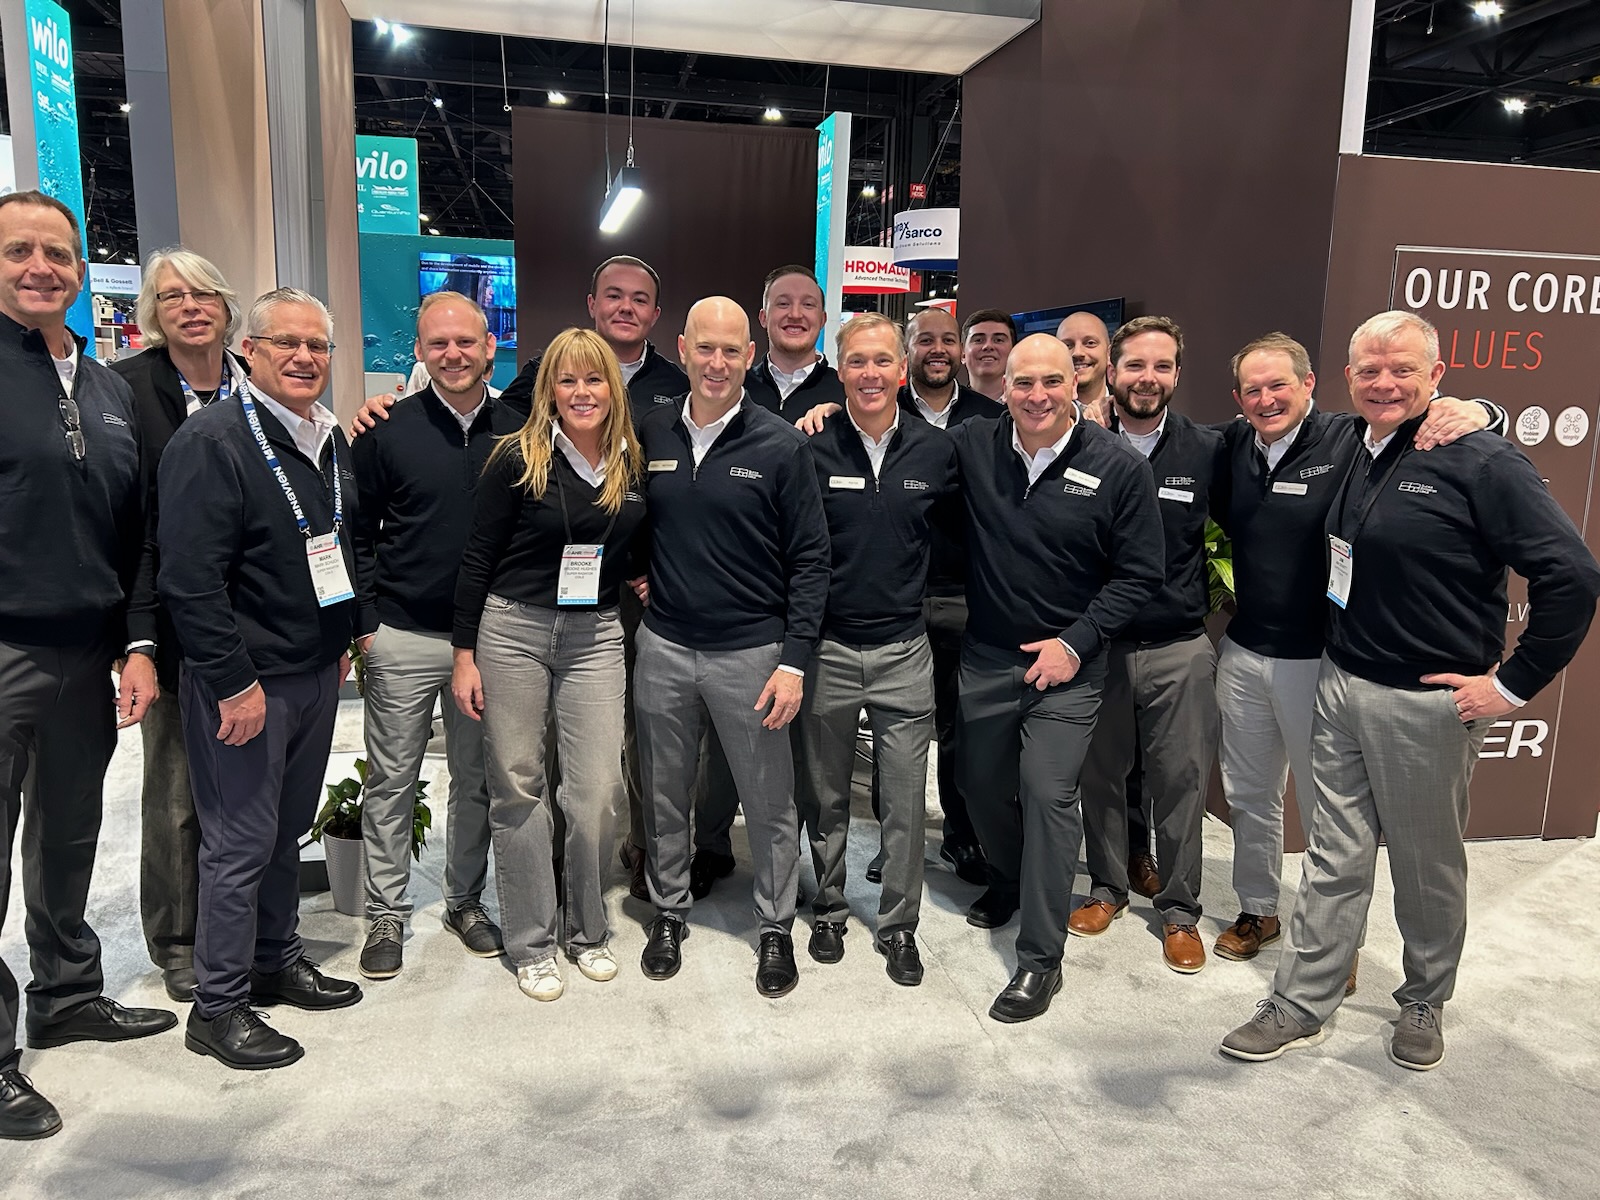 corporate group posing at a trade show booth